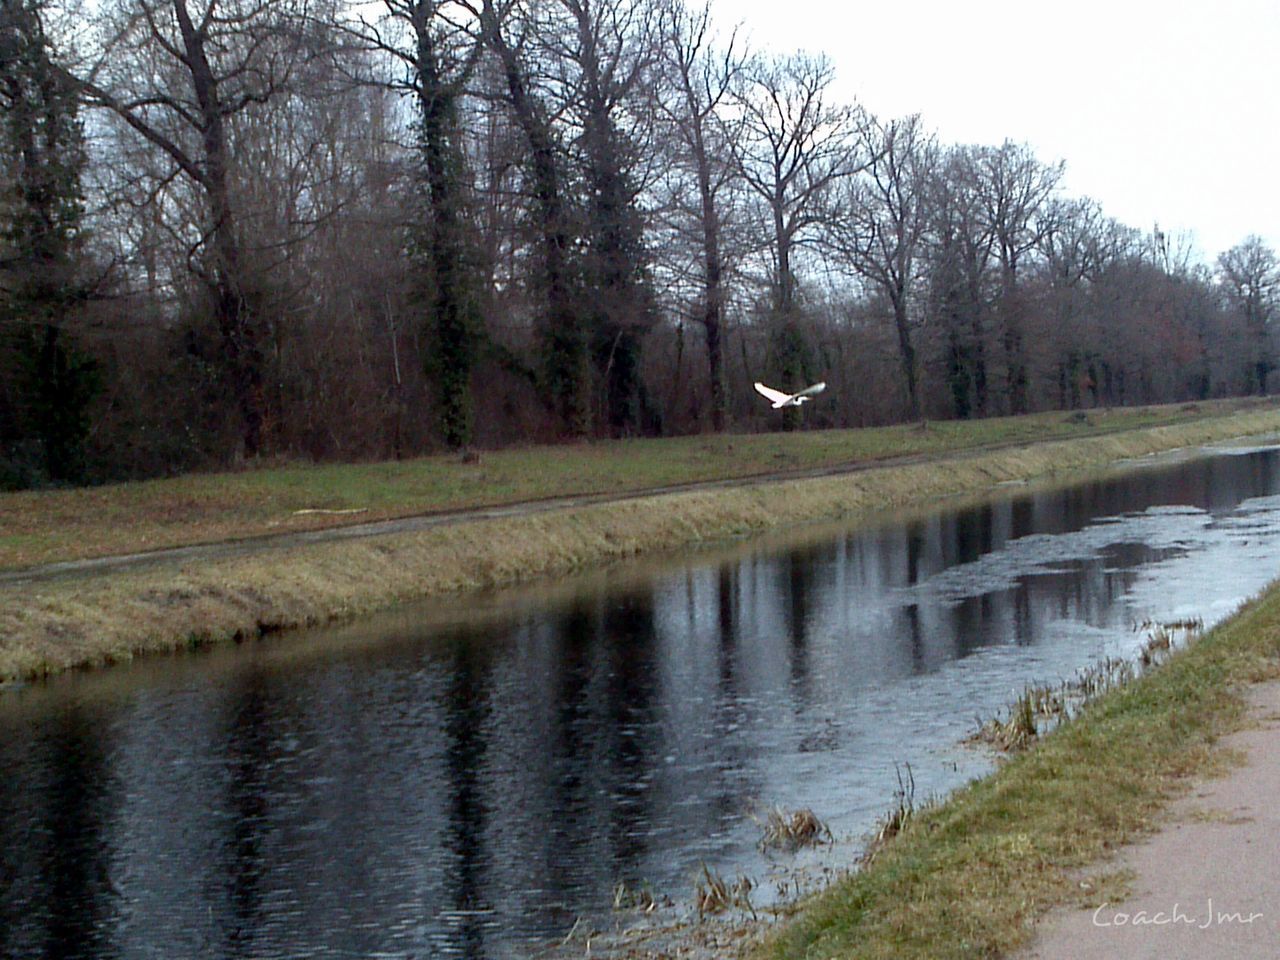 VIEW OF SWAN FLYING OVER LAKE